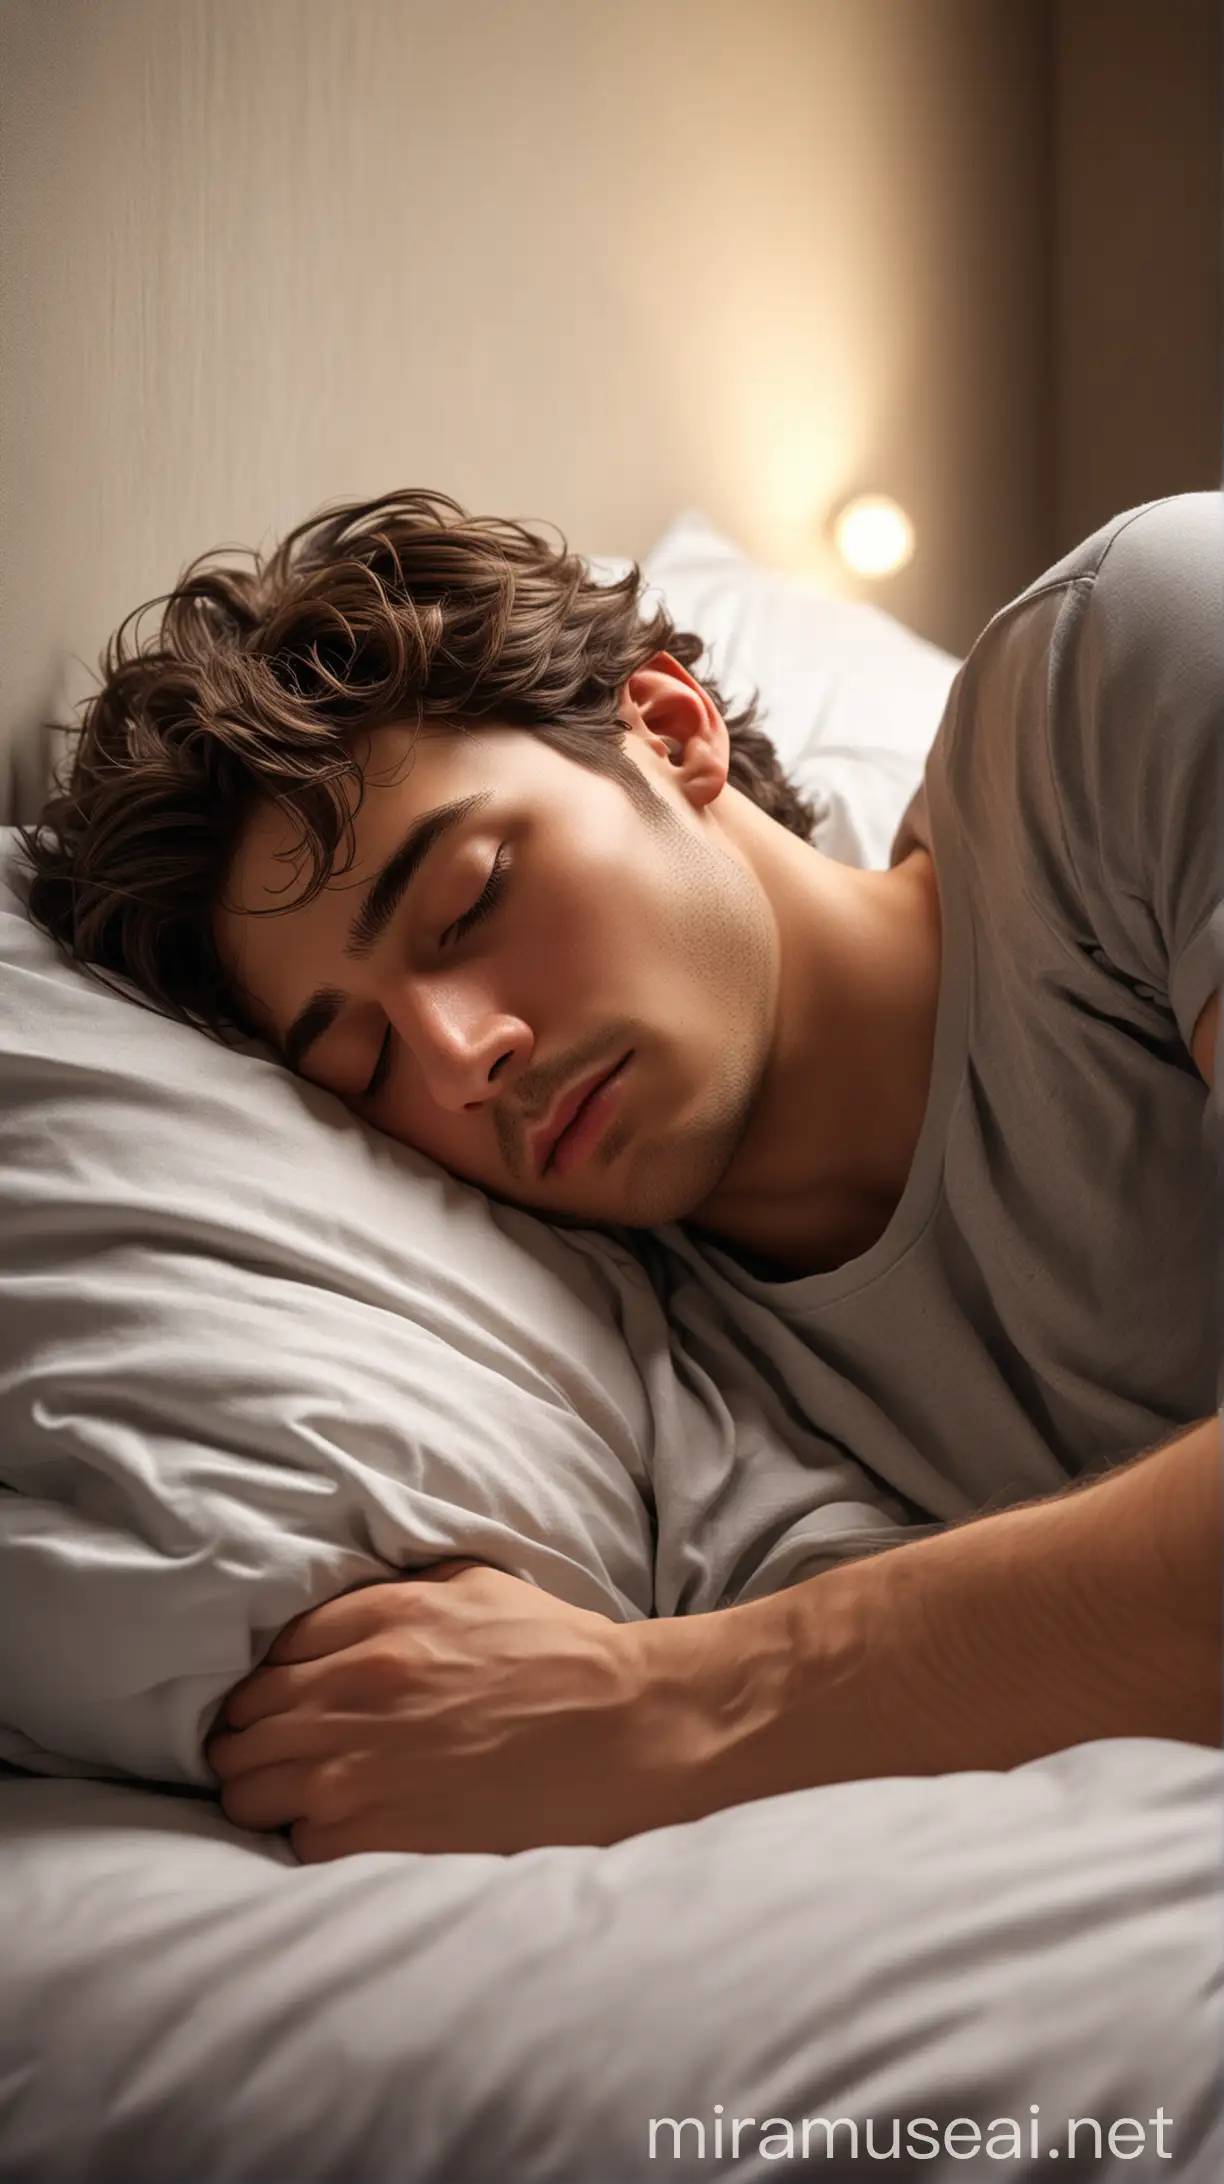 Vibrant 3D Portrait of a Young Man Sleeping in a Dynamic Bed Scene